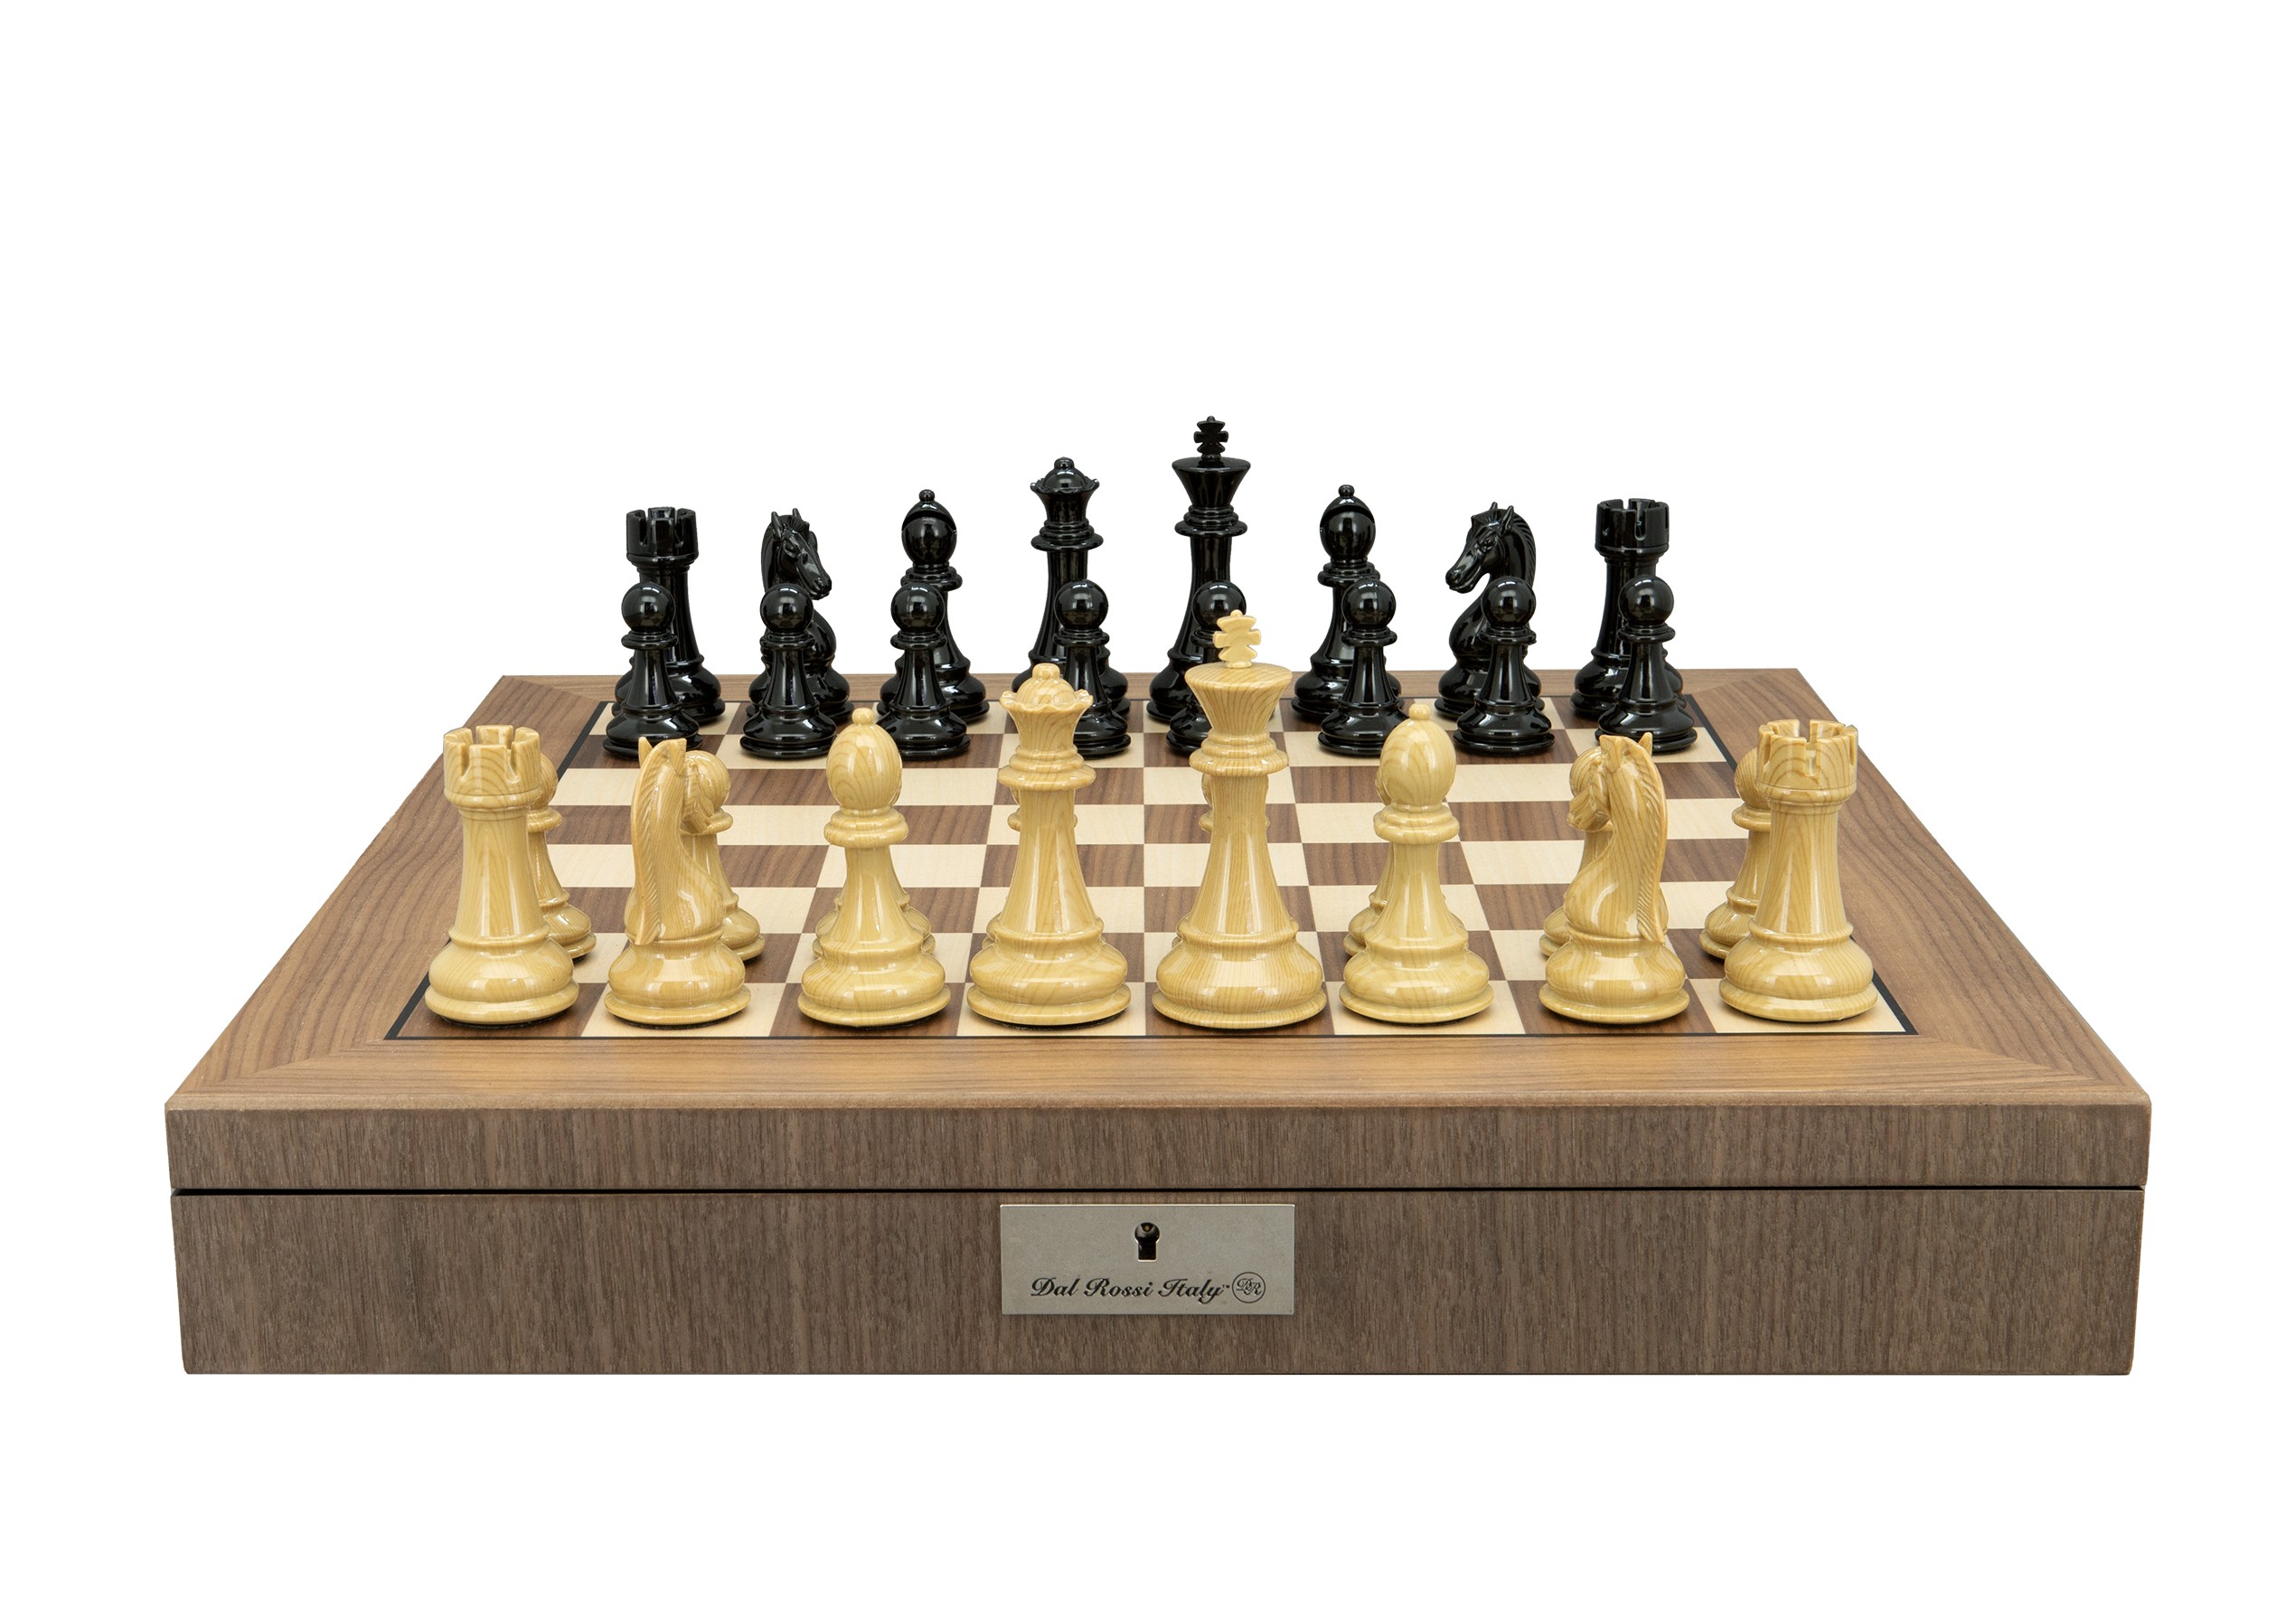 Dal Rossi Italy Black Ebony & Wood Grain Finish Weight  pieces110mm Chessmen on a Walnut Inlaid Chess Box with Compartments 20"